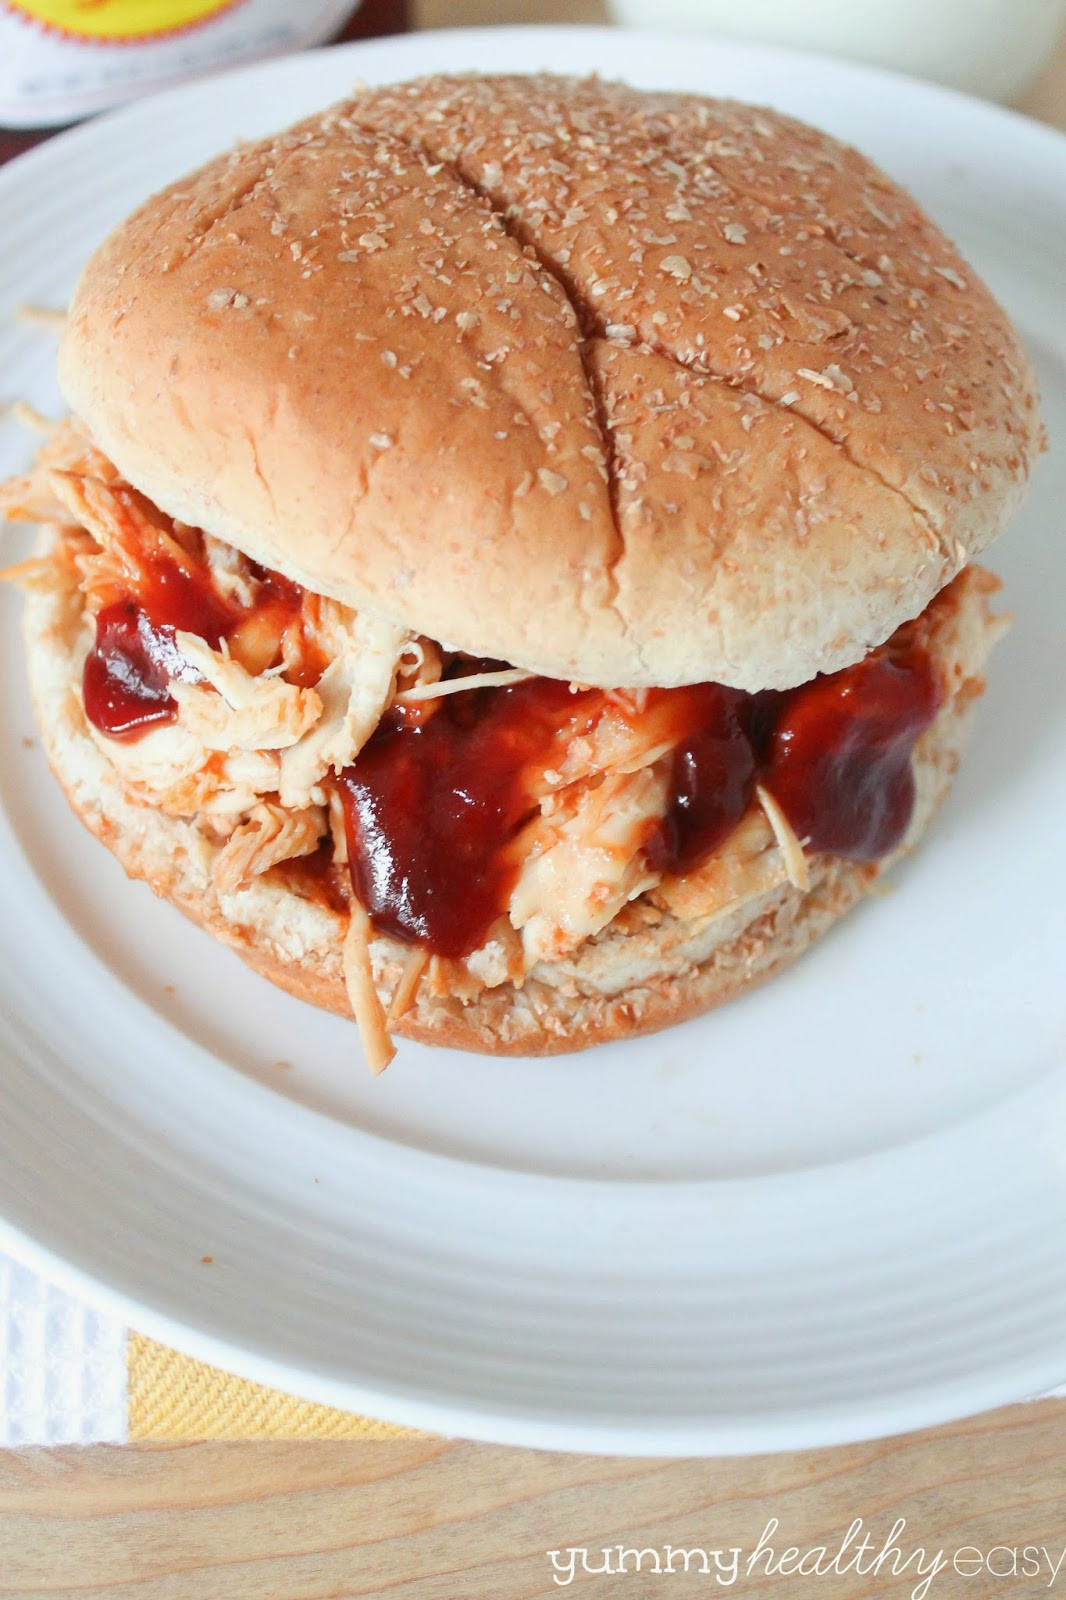 Slow Cooker Bbq Chicken Sandwiches
 Slow Cooker BBQ Shredded Chicken Sandwiches only 3